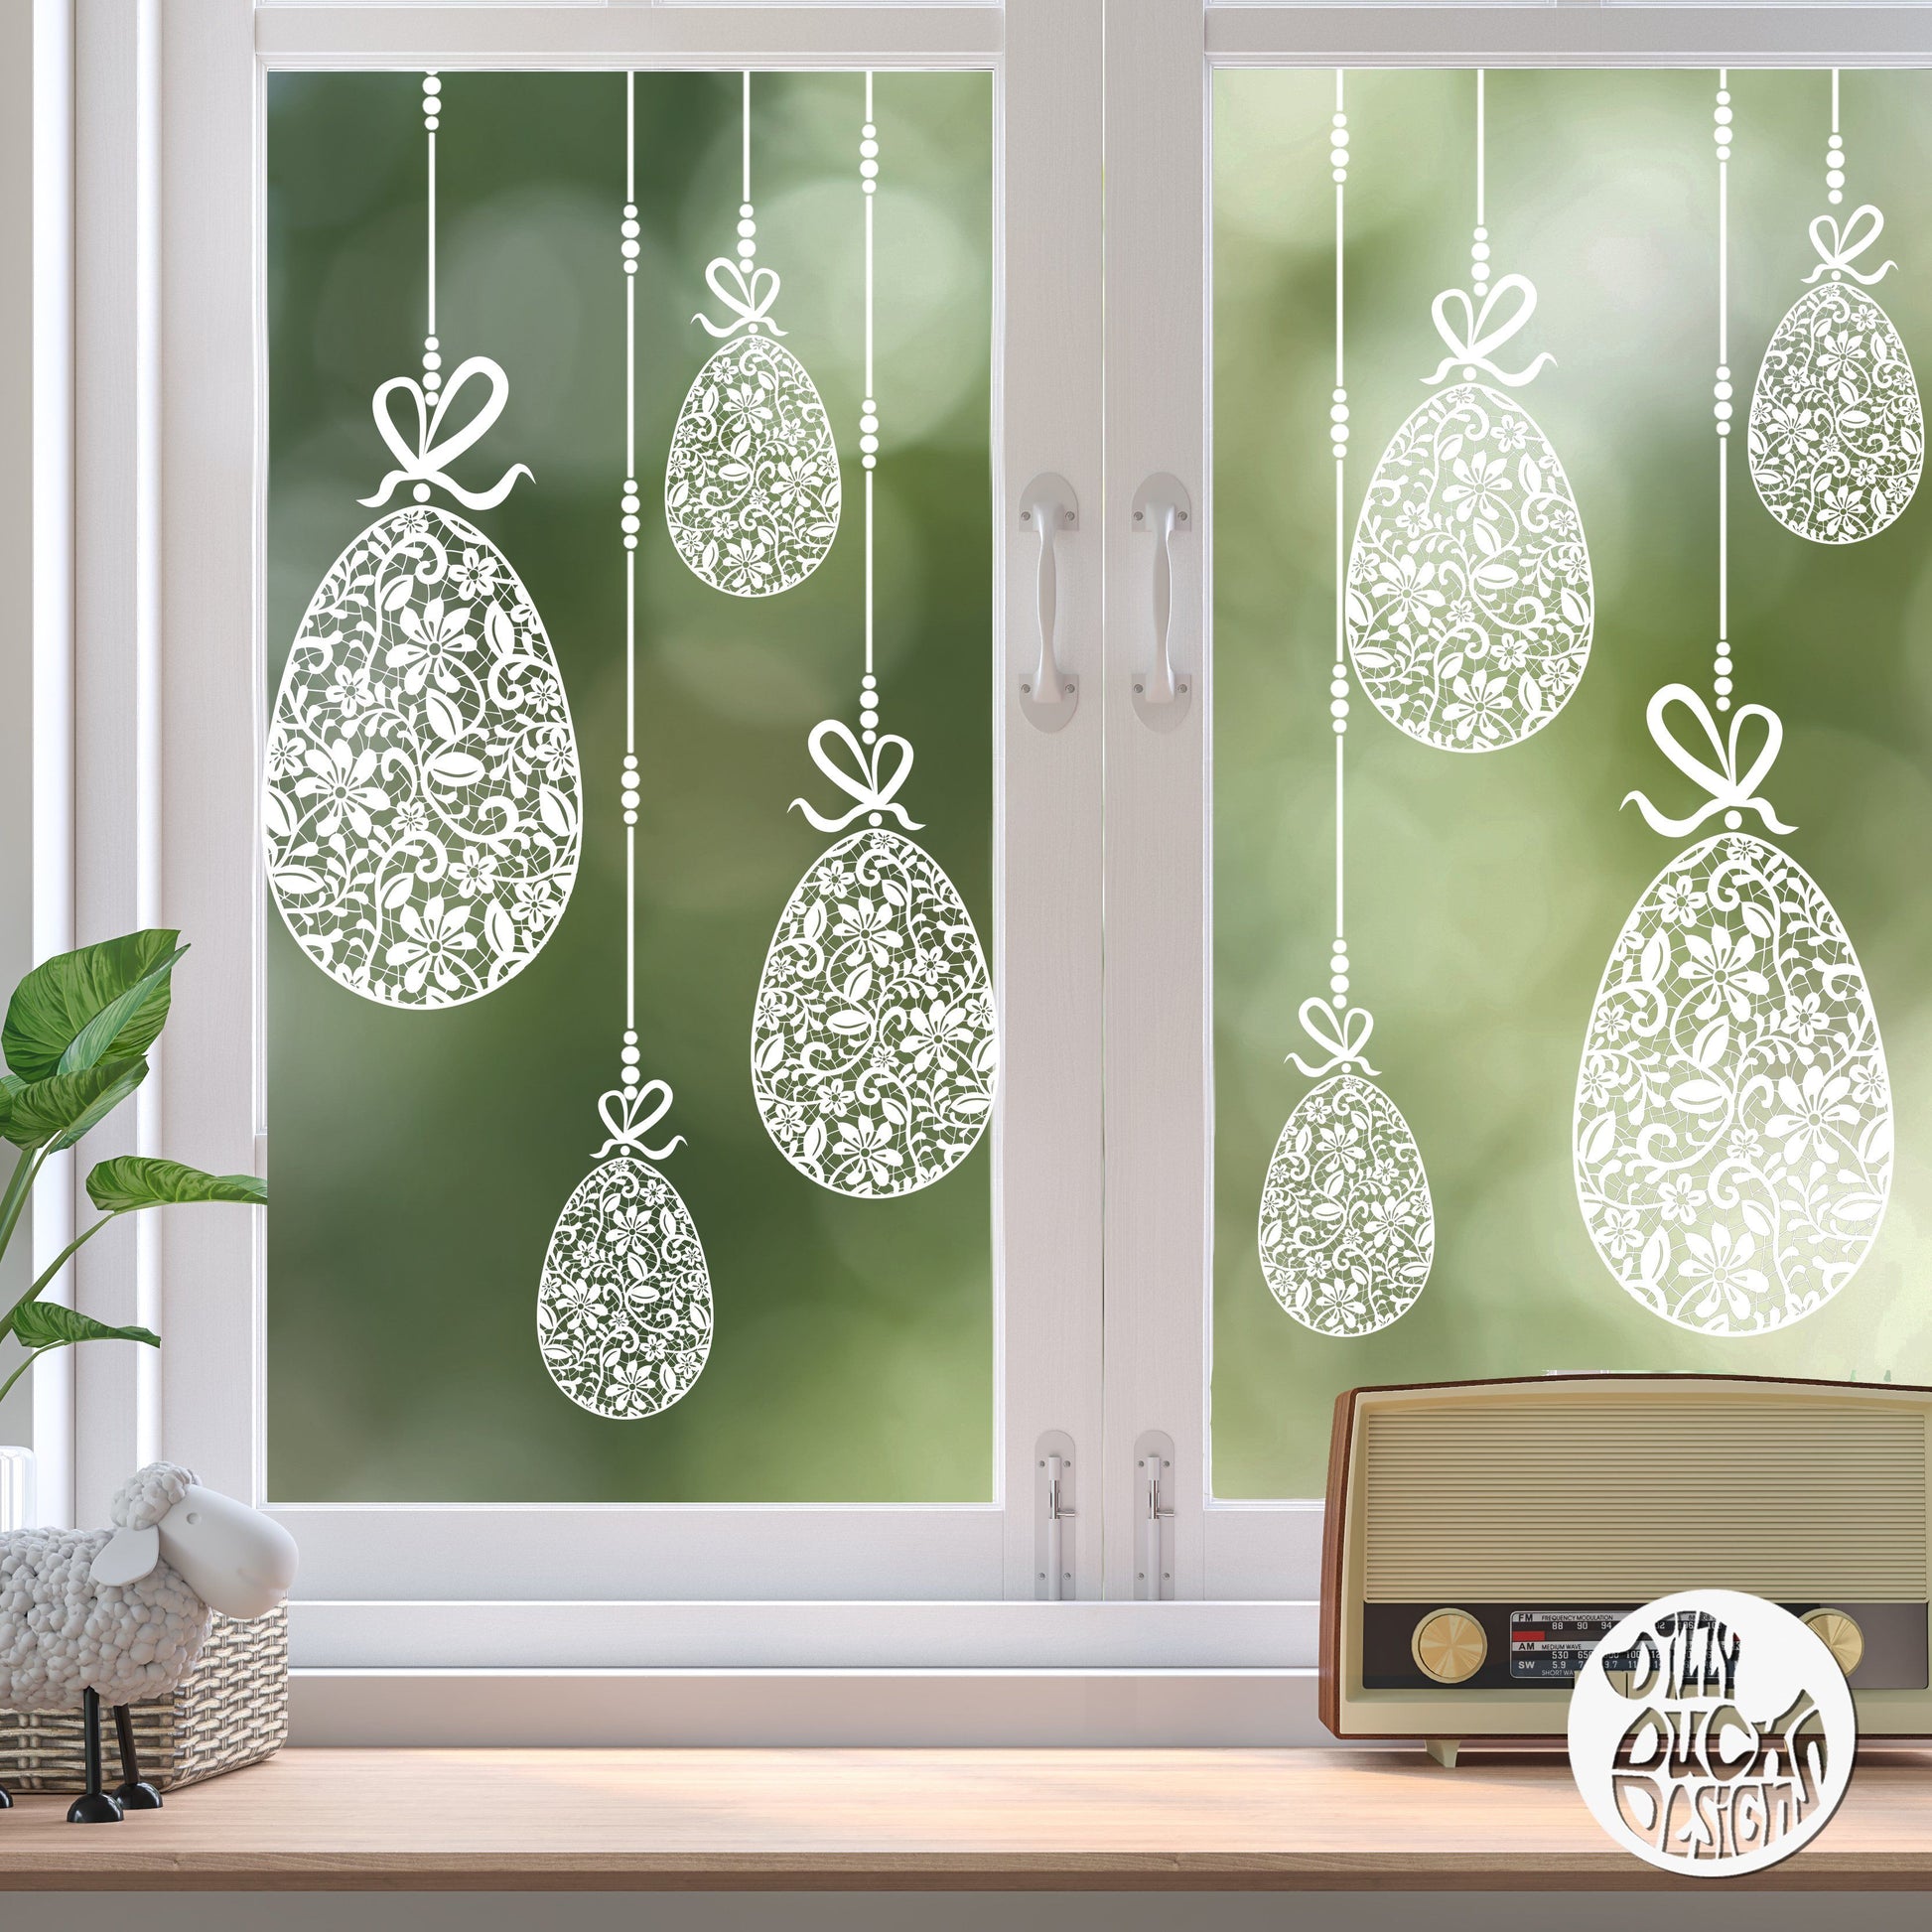 Decal 10 x Lace Easter Egg Window Decals - Clear Dizzy Duck Designs